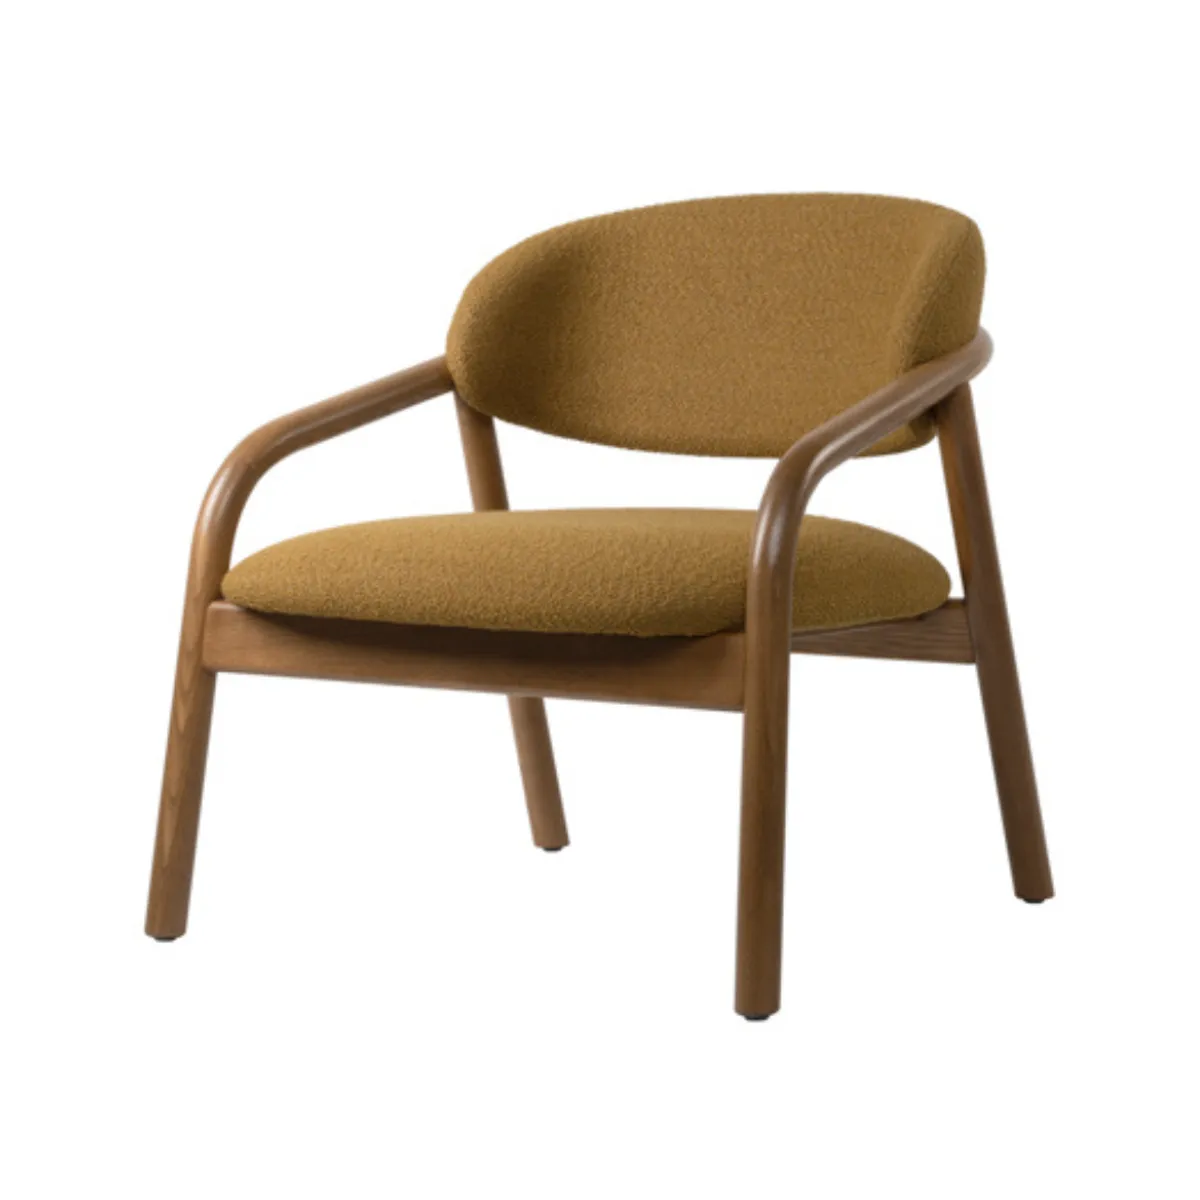 Adeline lounge chair 1